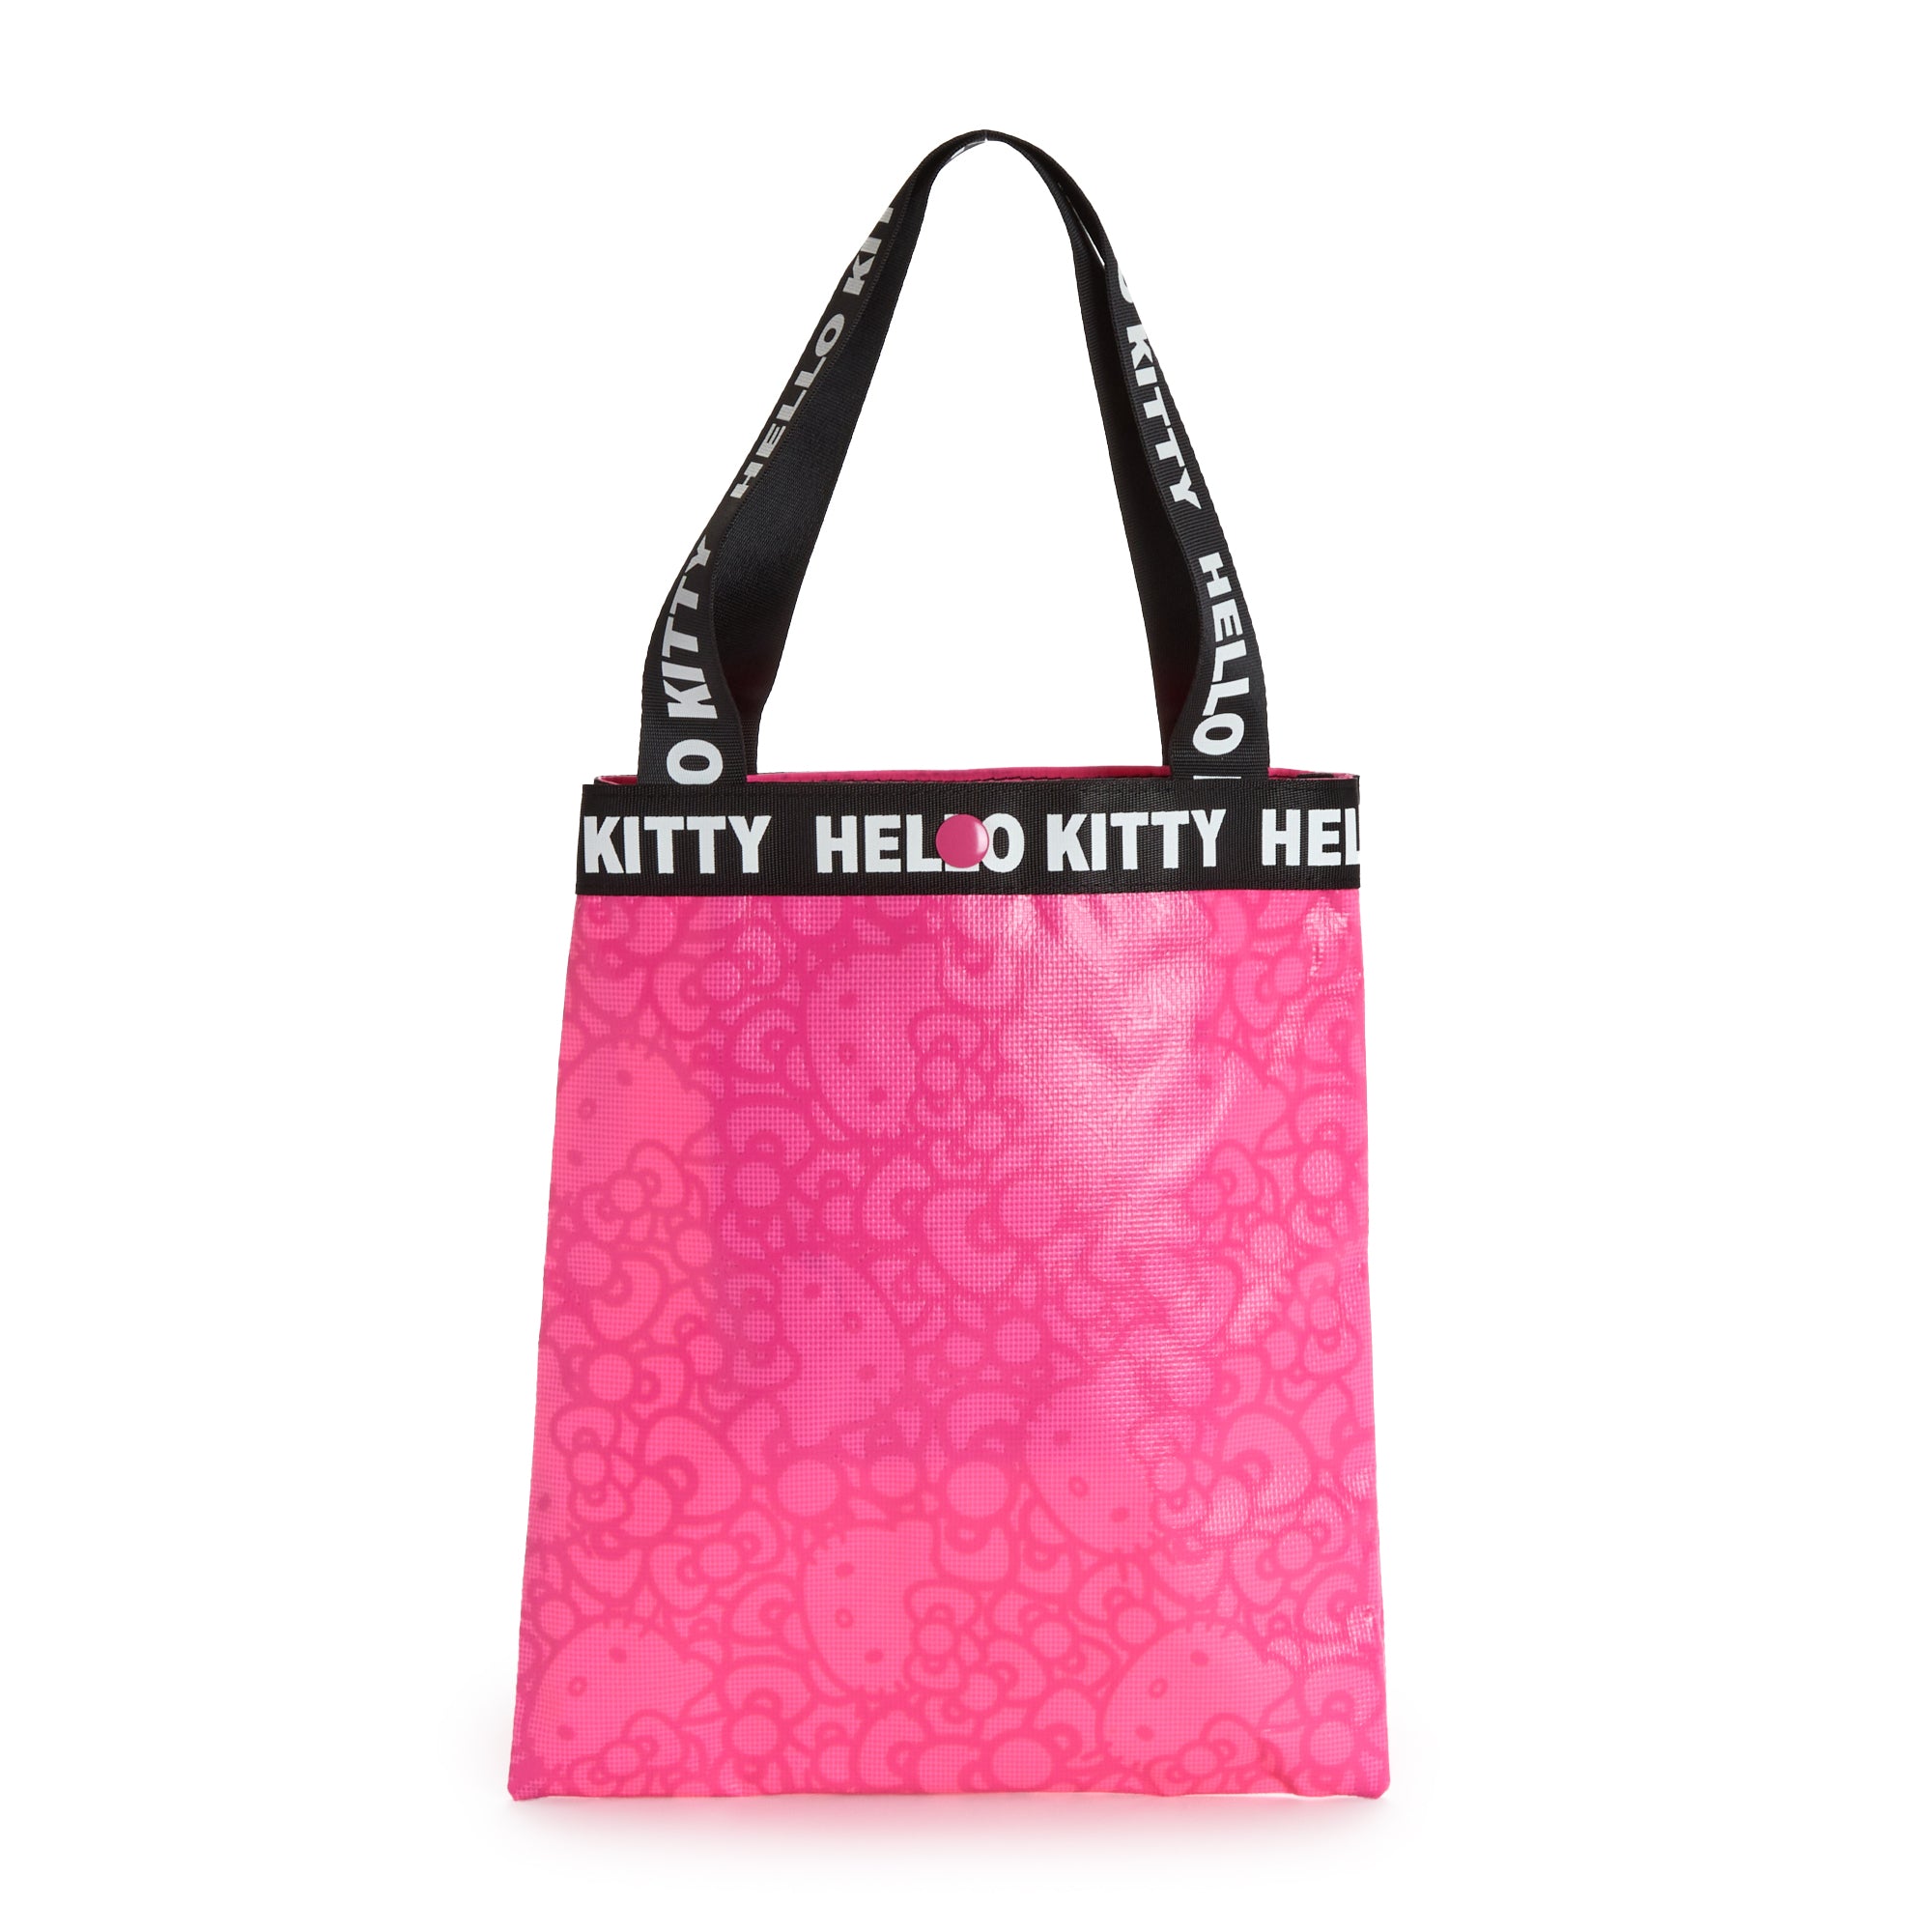 Hello Kitty Women's Beach Carry-On Tote Bag